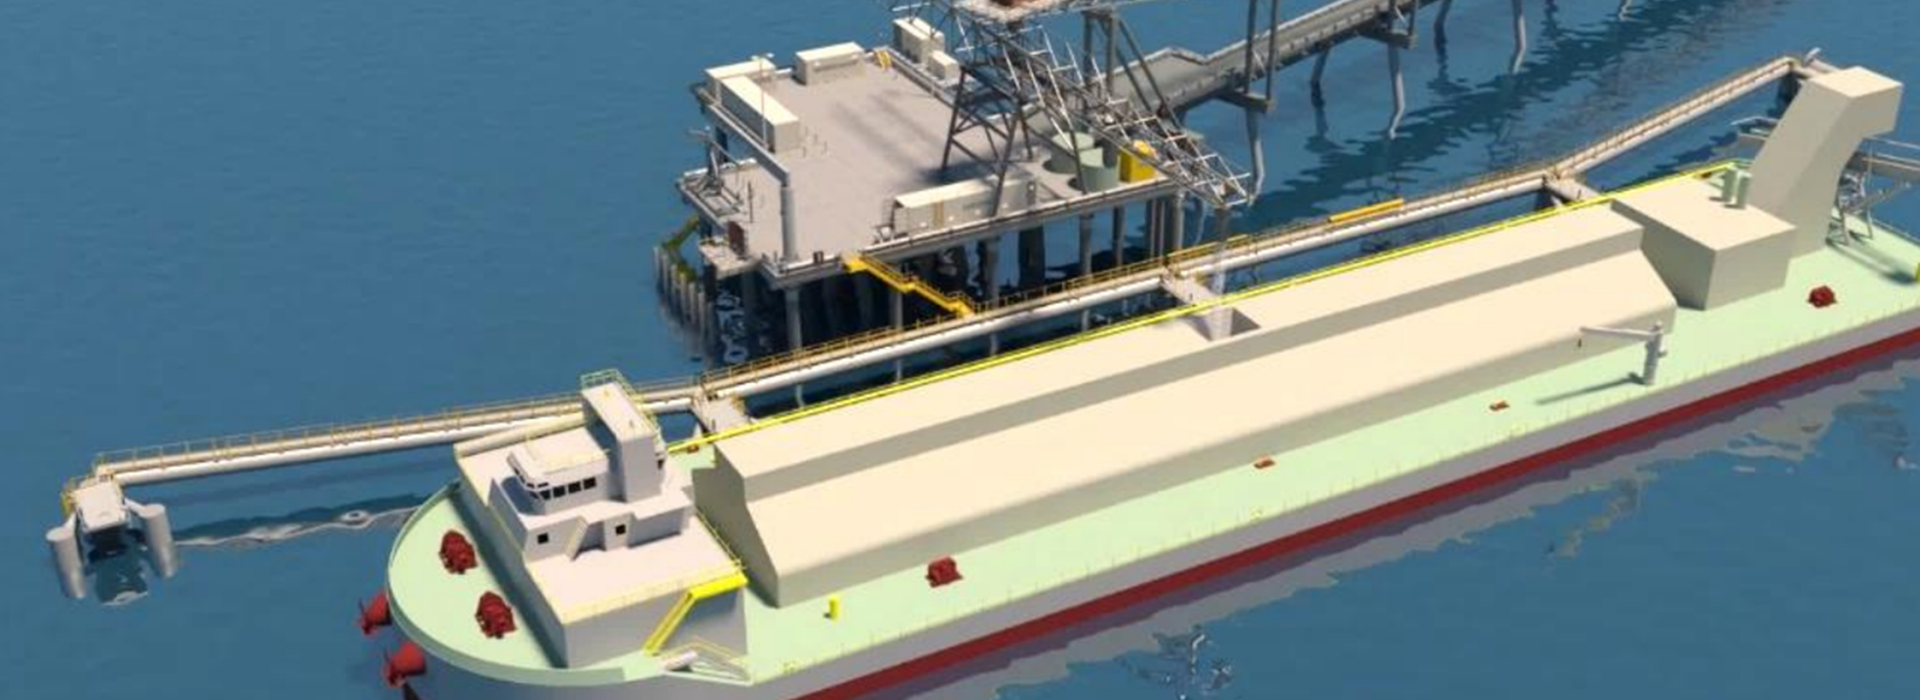 McConnell Dowell secures Mardie marine structures contract 